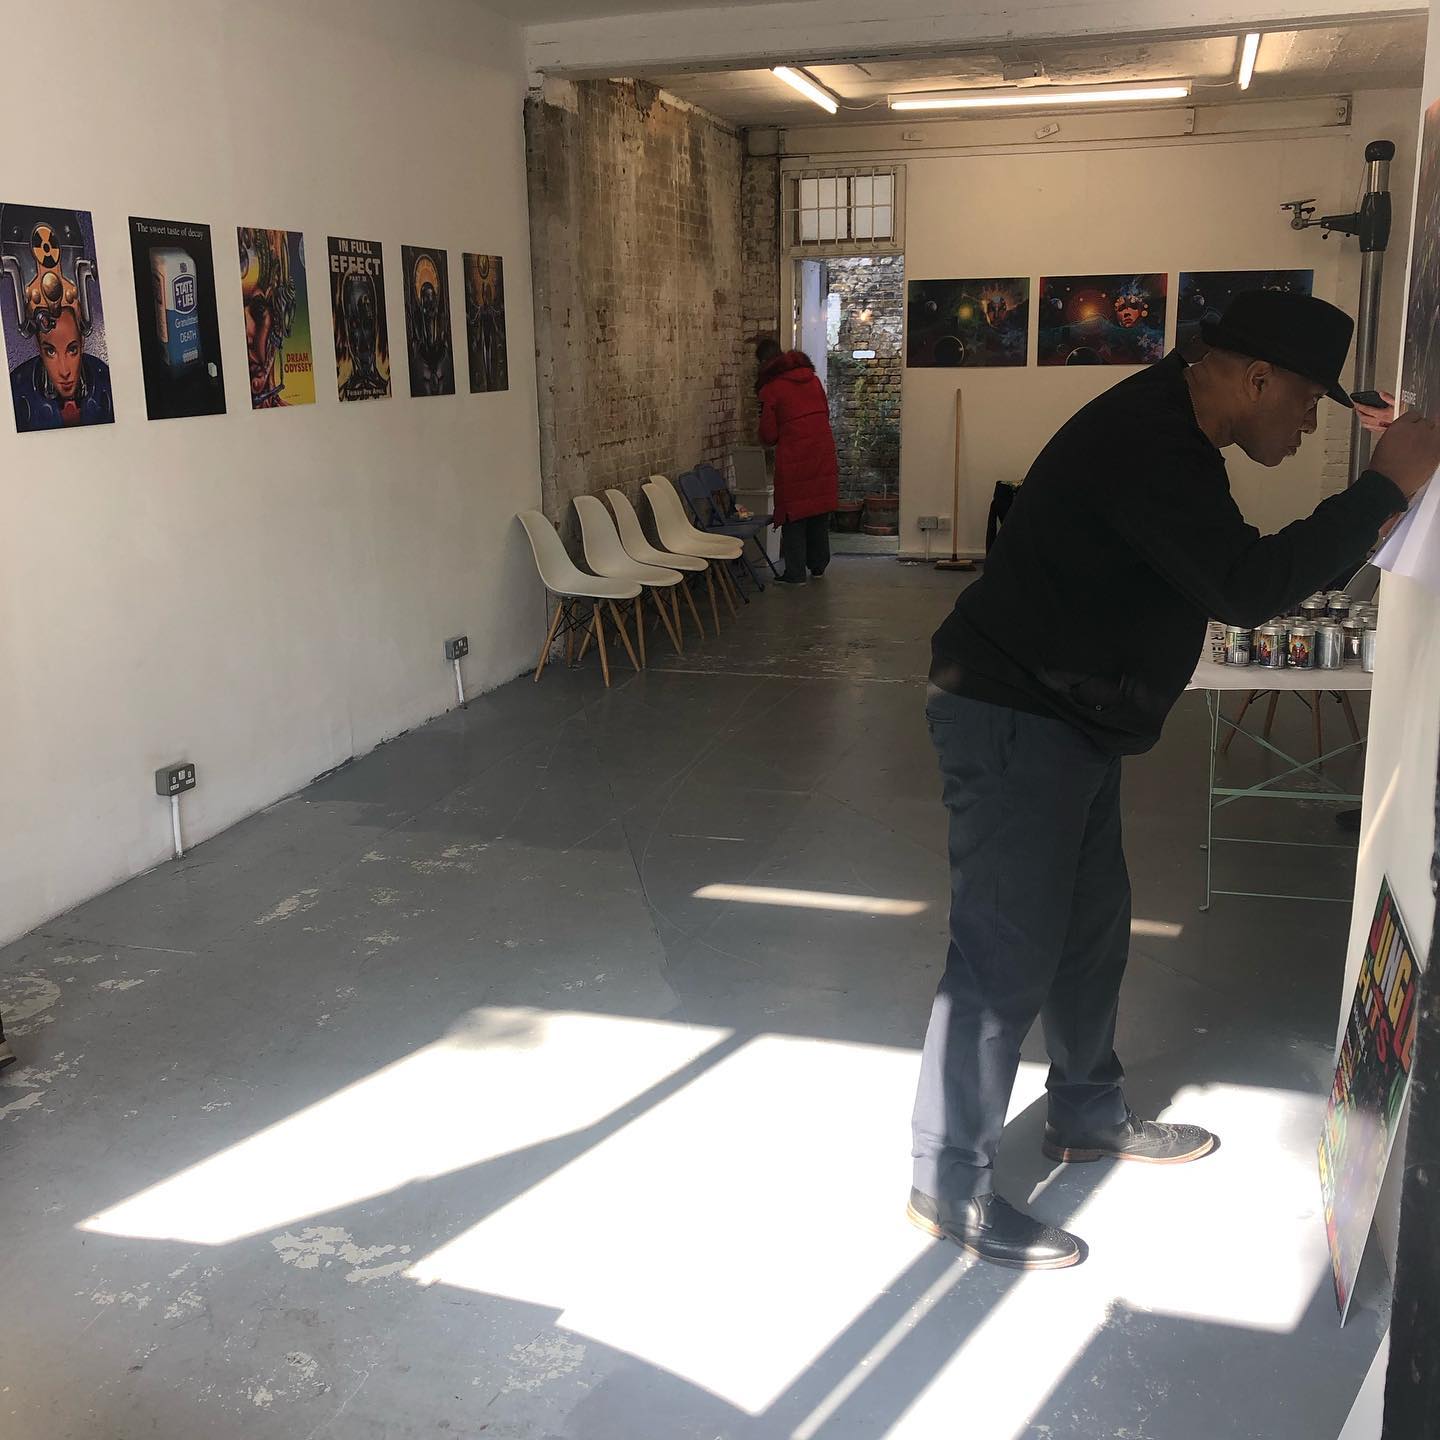 Our free Junior Tomlin exhibition is now open! Come along to Studio 59, 59 Old Bethnal Green Road, E2 6QA today for art, books, talks and low alcohol beer tasting. #artexhibition #art #juniortomlin #book #bookstagram #velocitypress #bethnalgreen